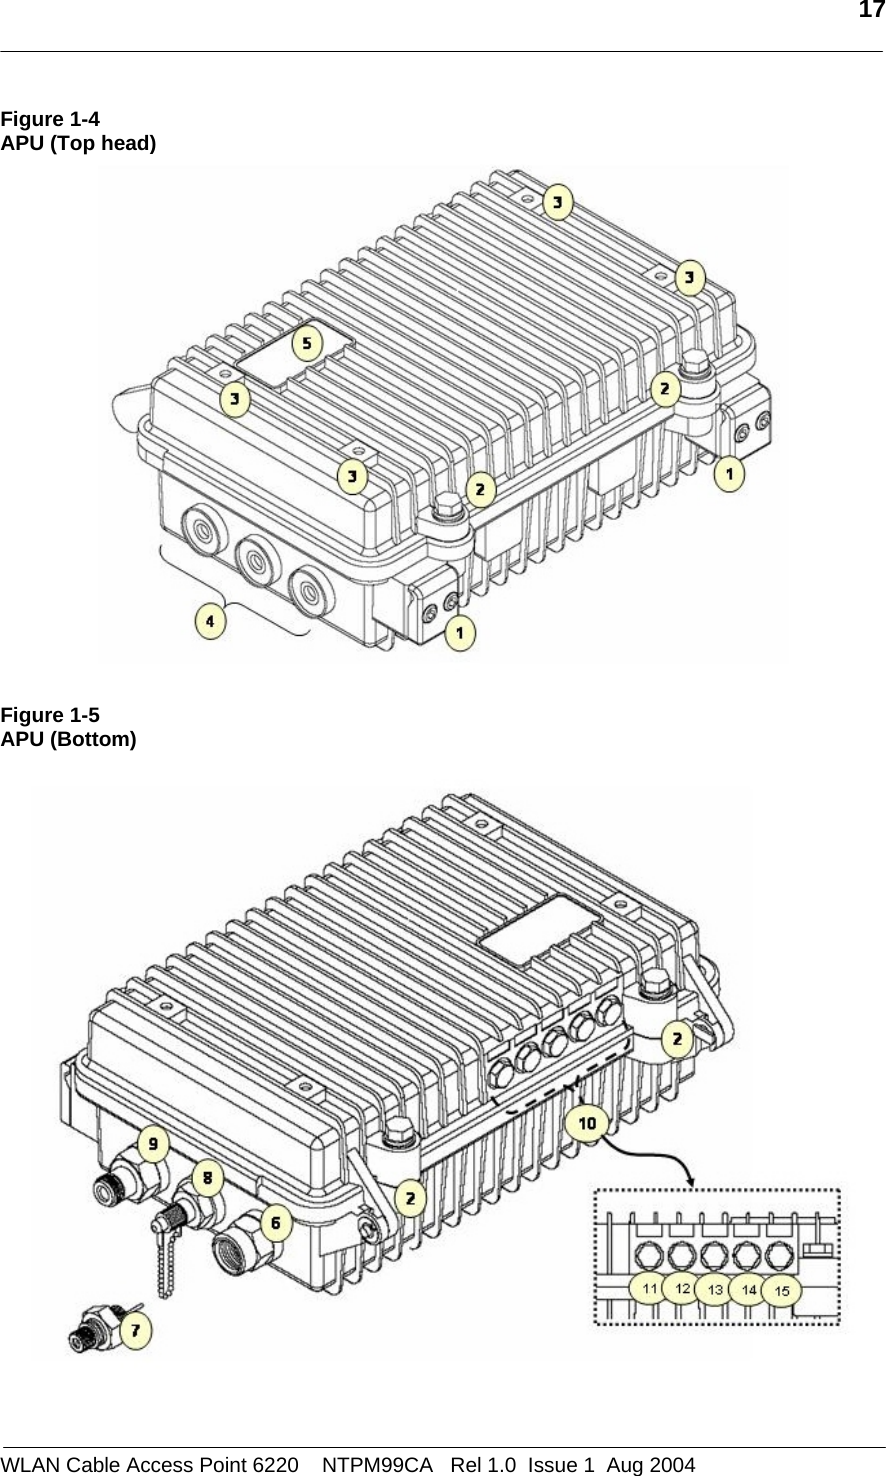   17  Figure 1-4 APU (Top head)   Figure 1-5 APU (Bottom)     WLAN Cable Access Point 6220    NTPM99CA   Rel 1.0  Issue 1  Aug 2004 